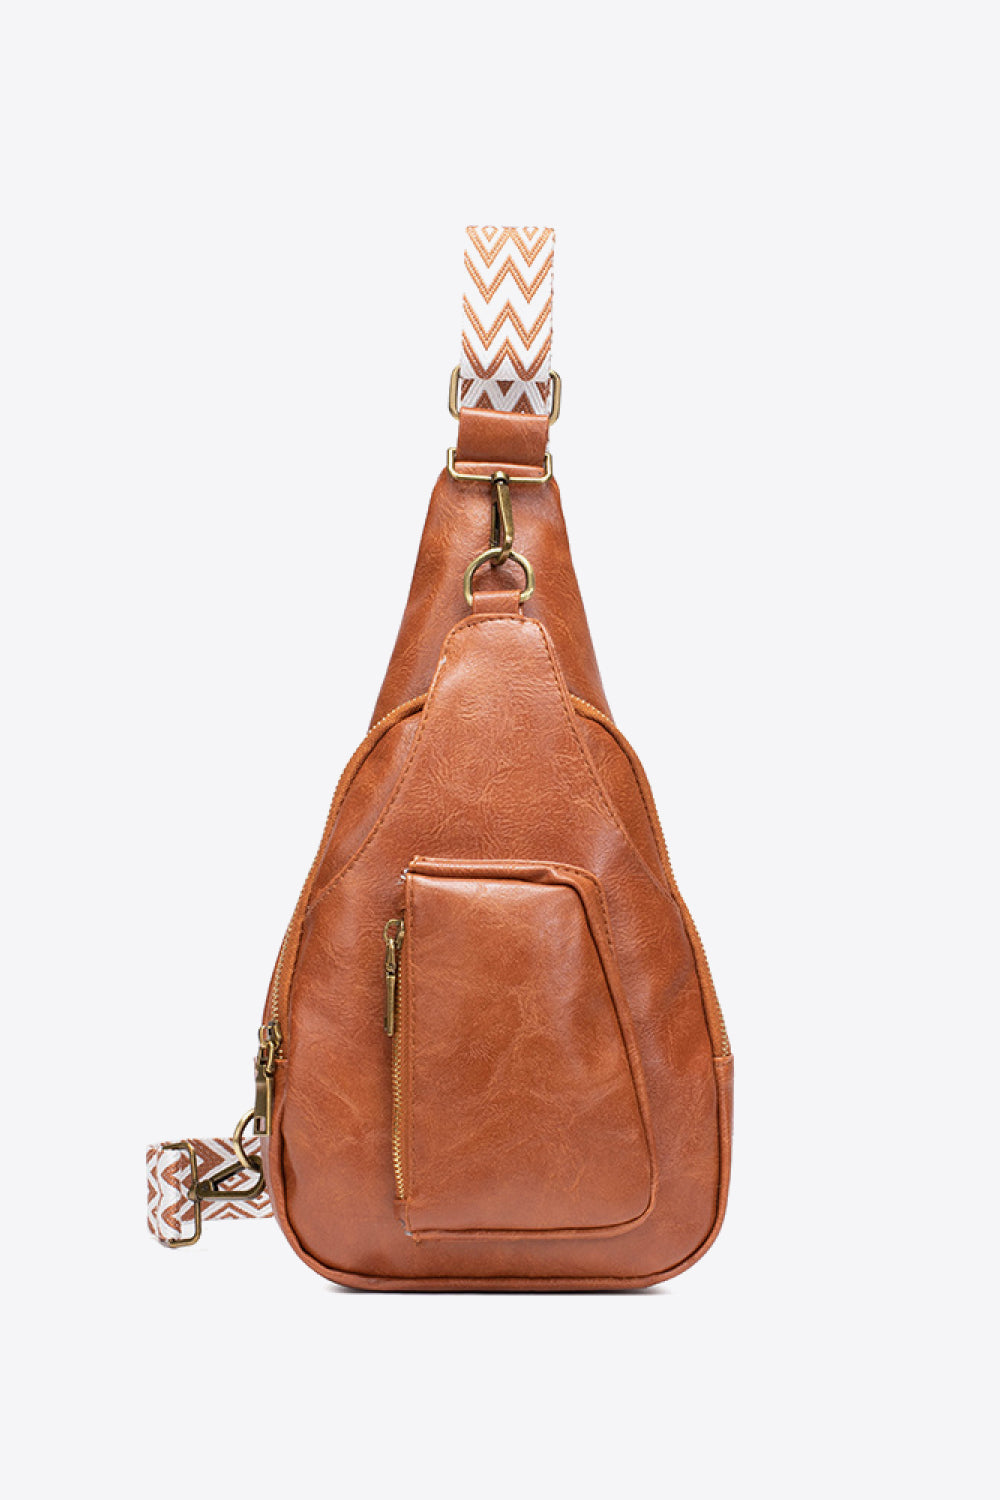 All The Feels Vegan Leather Crossbody Sling Bag Accessories Southern Soul Collectives 